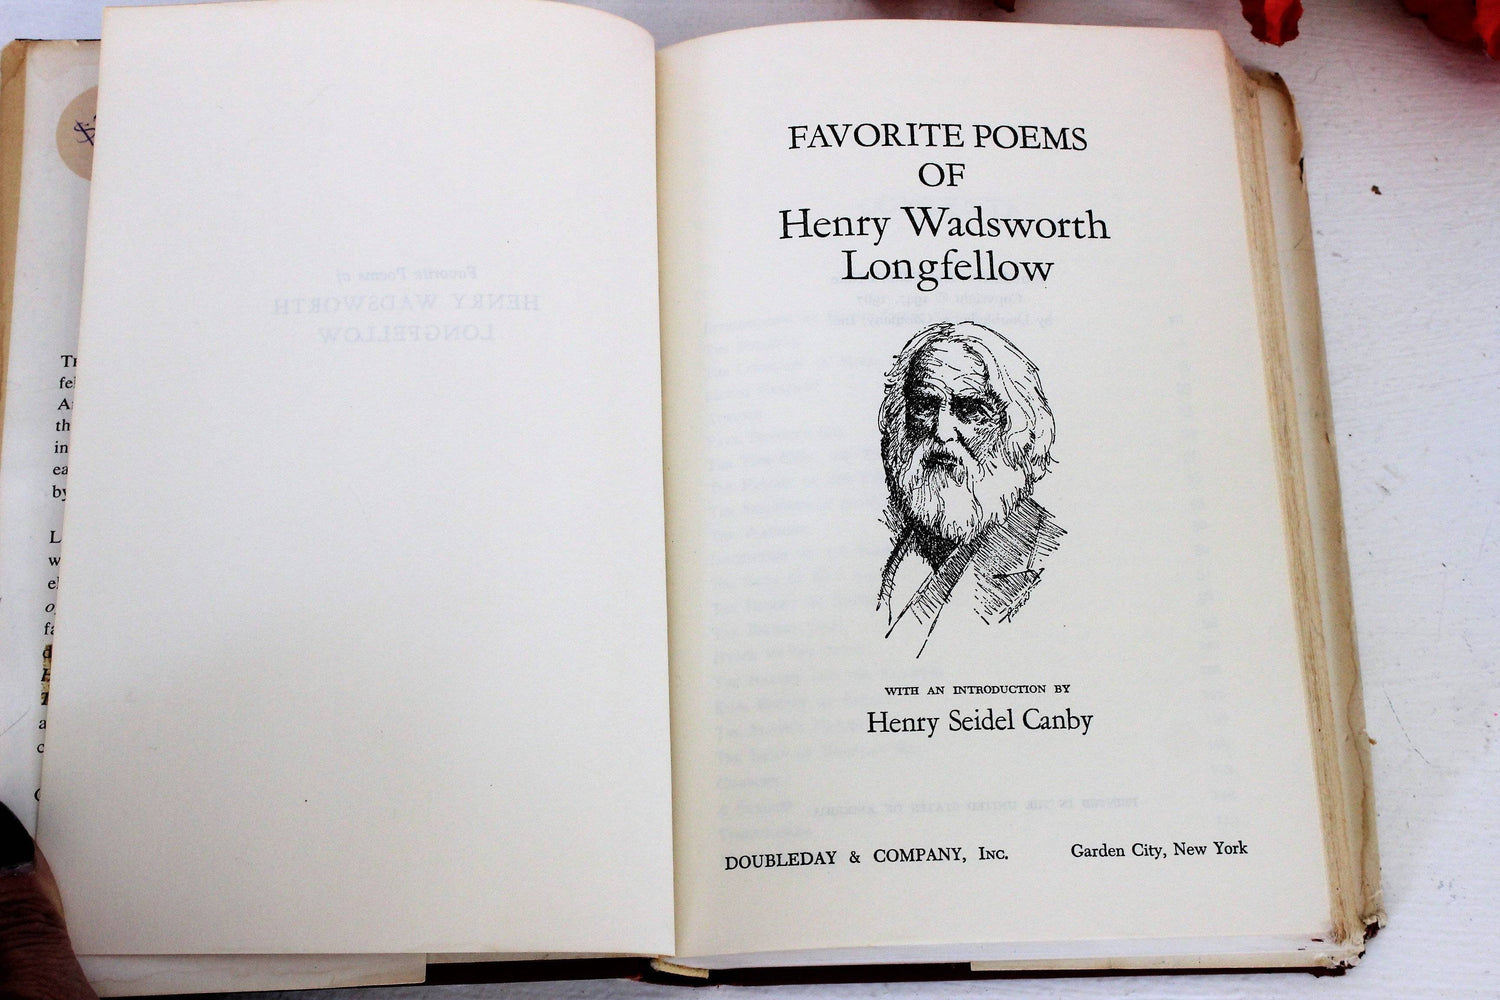 Vintage Book  "Favorite Poems of Henry Wadsworth Longfellow"  with intro by Henry Seidel Canby, 1967-Mint Chips Vintage Home Goods-1967,Book of Poems,Doubleday,Favorite Poems of Henry Wadsworth Longfellow,Henry Seidel Canby,Henry Wadsworth Longfellow,Old Book,Poetry,Vintage,Vintage Book